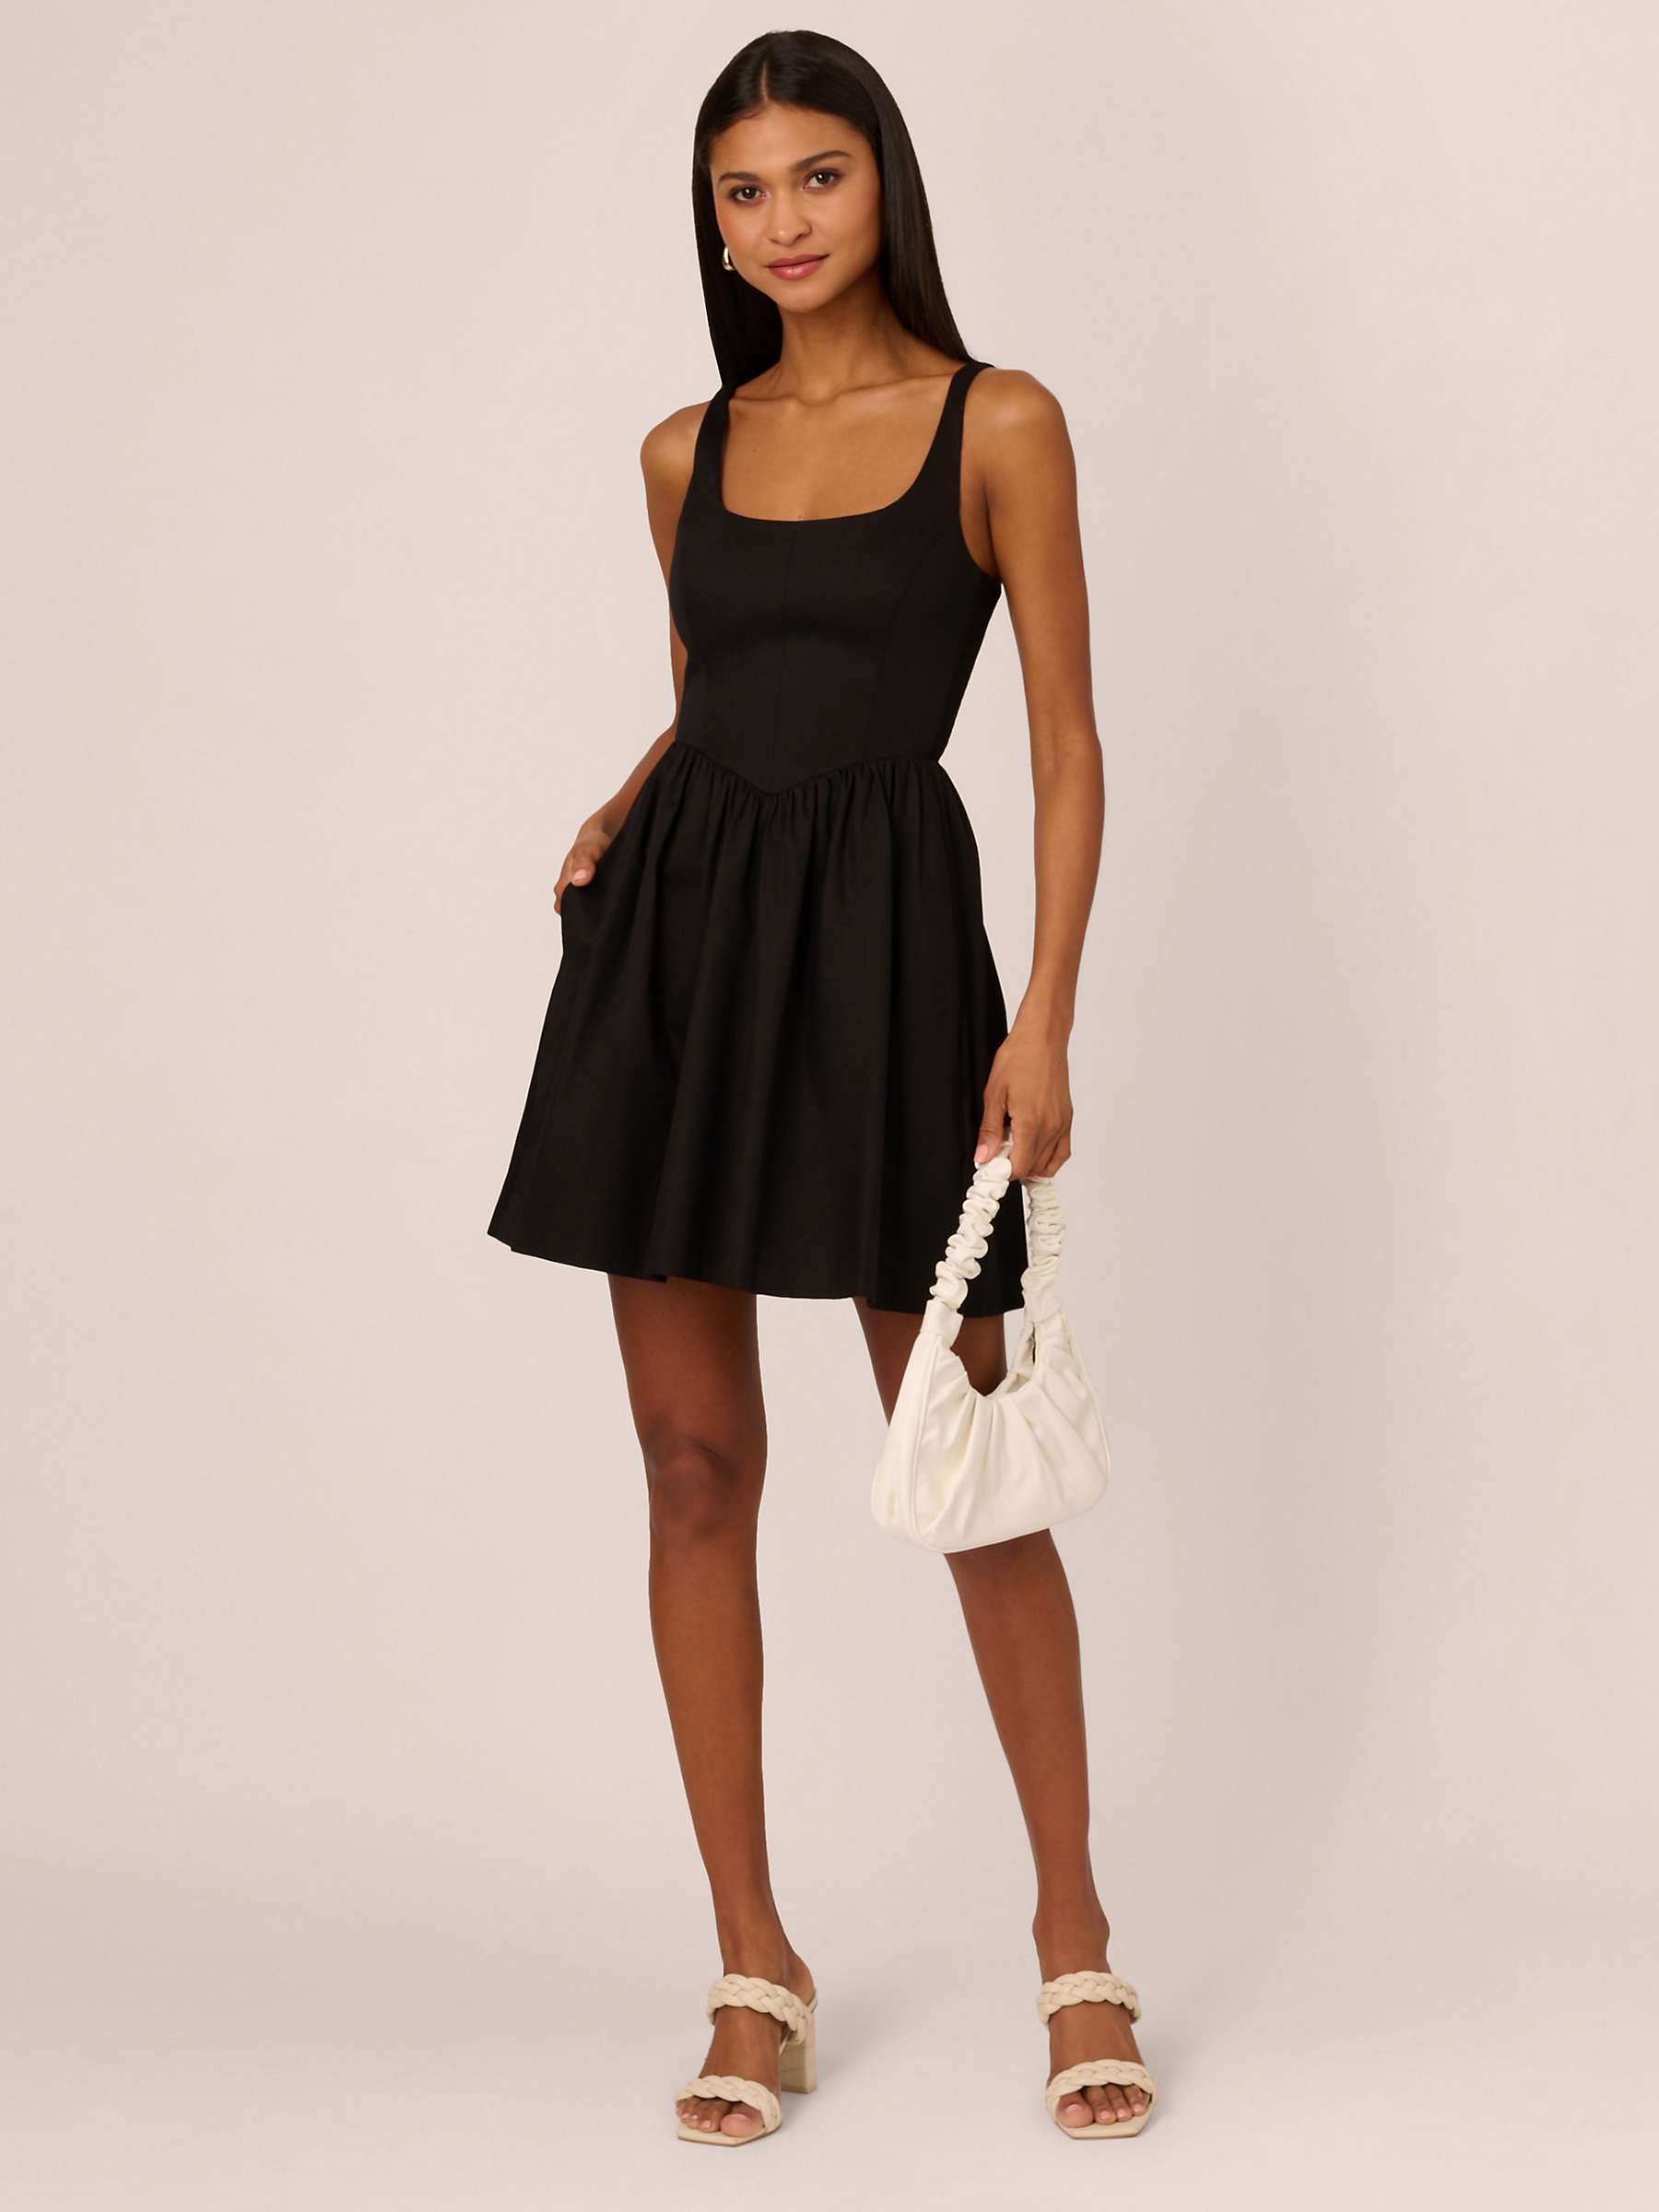 Buy Adrianna by Adrianna Papell Stretch Skater Mini Dress, Black Online at johnlewis.com